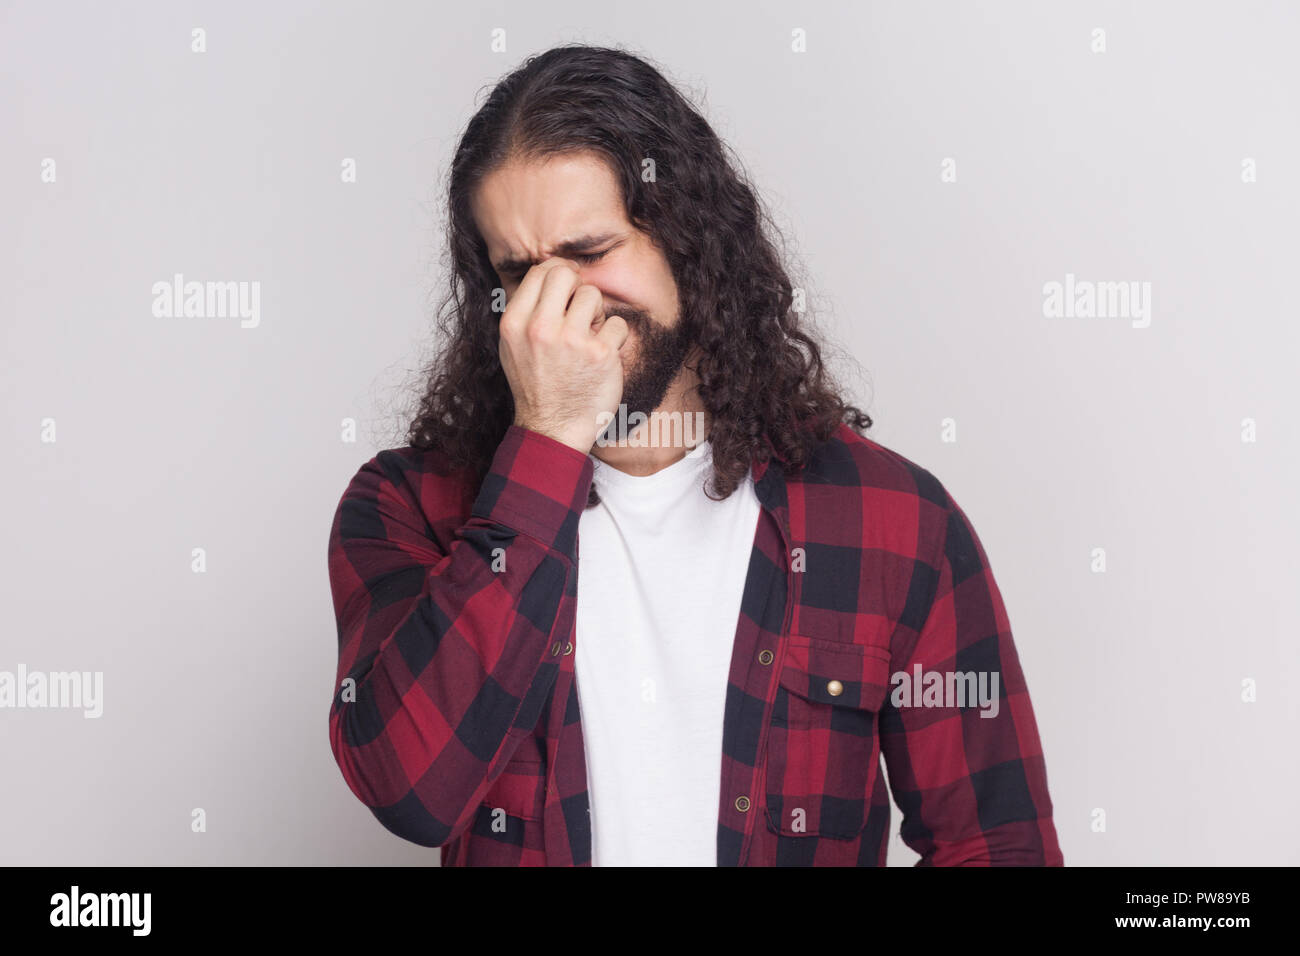 Portrait of sad crying man with beard and black long curly hair in casual style, checkered red shirt standing with depressed face, sorrow and crying.  Stock Photo